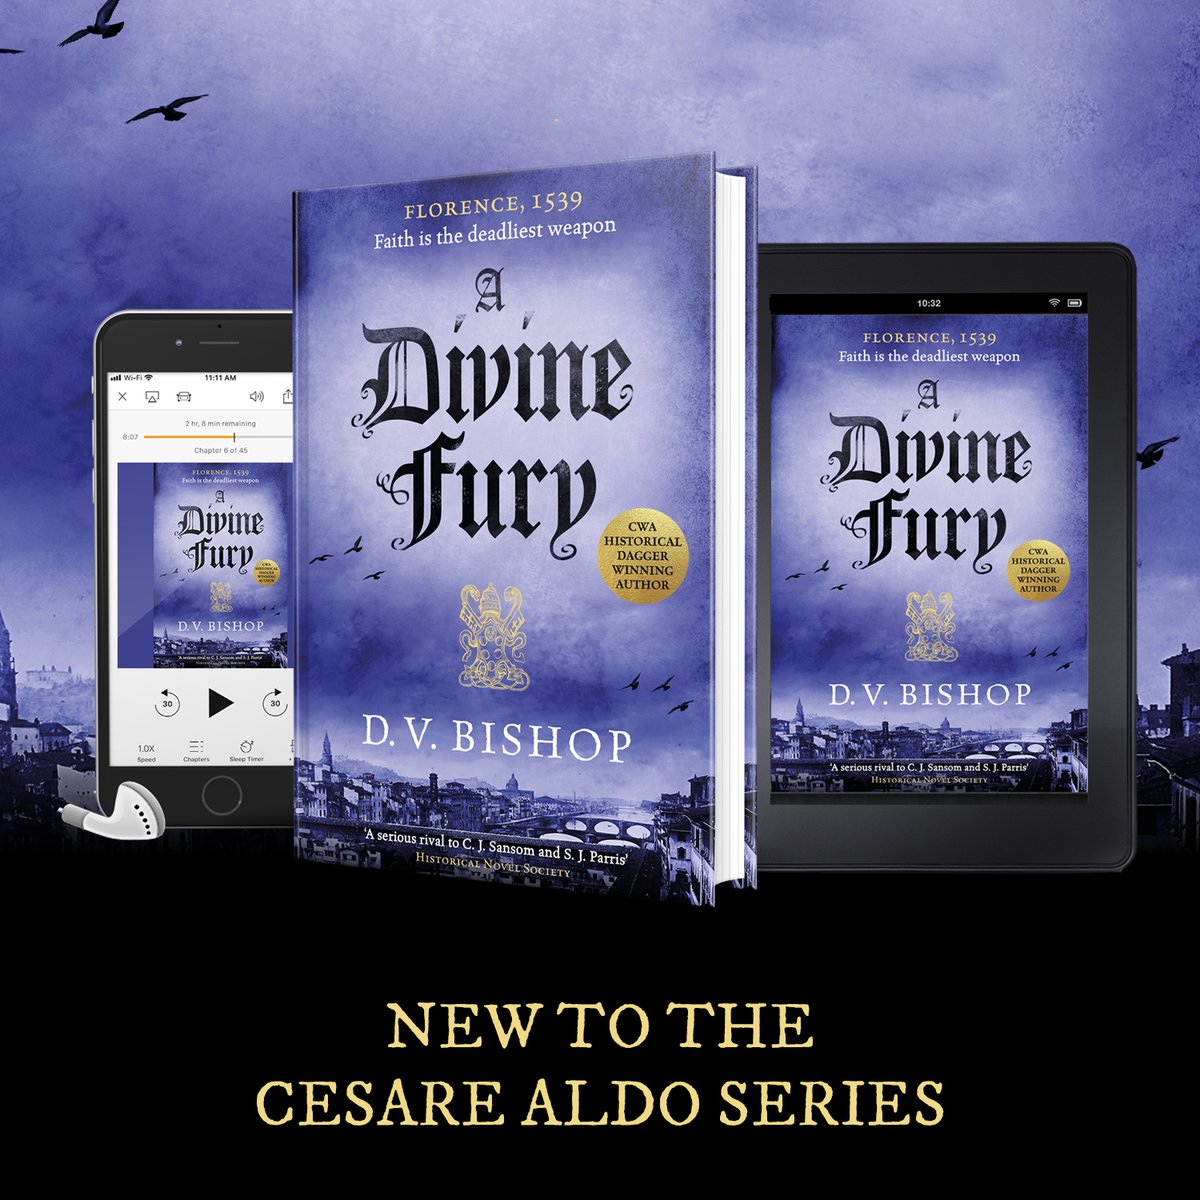 21 days until A DIVINE FURY - my new #CesareAldo historical thriller set in Renaissance Florence - is unleashed in audiobook, hardback & ebook! @panmacmillan